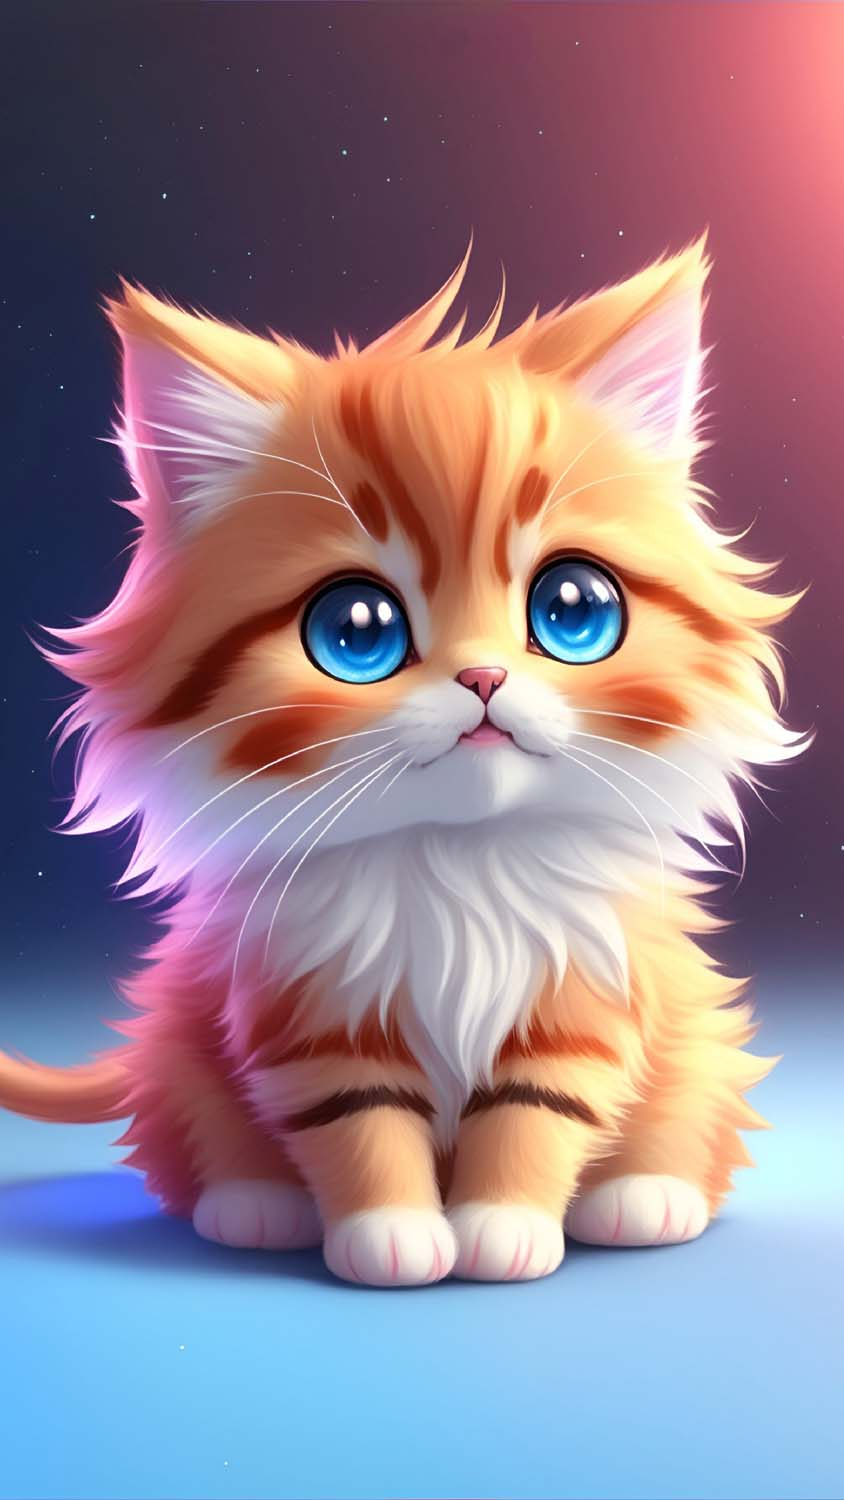 Iphone Wallpaper Cat Images  Free Photos PNG Stickers Wallpapers   Backgrounds  rawpixel